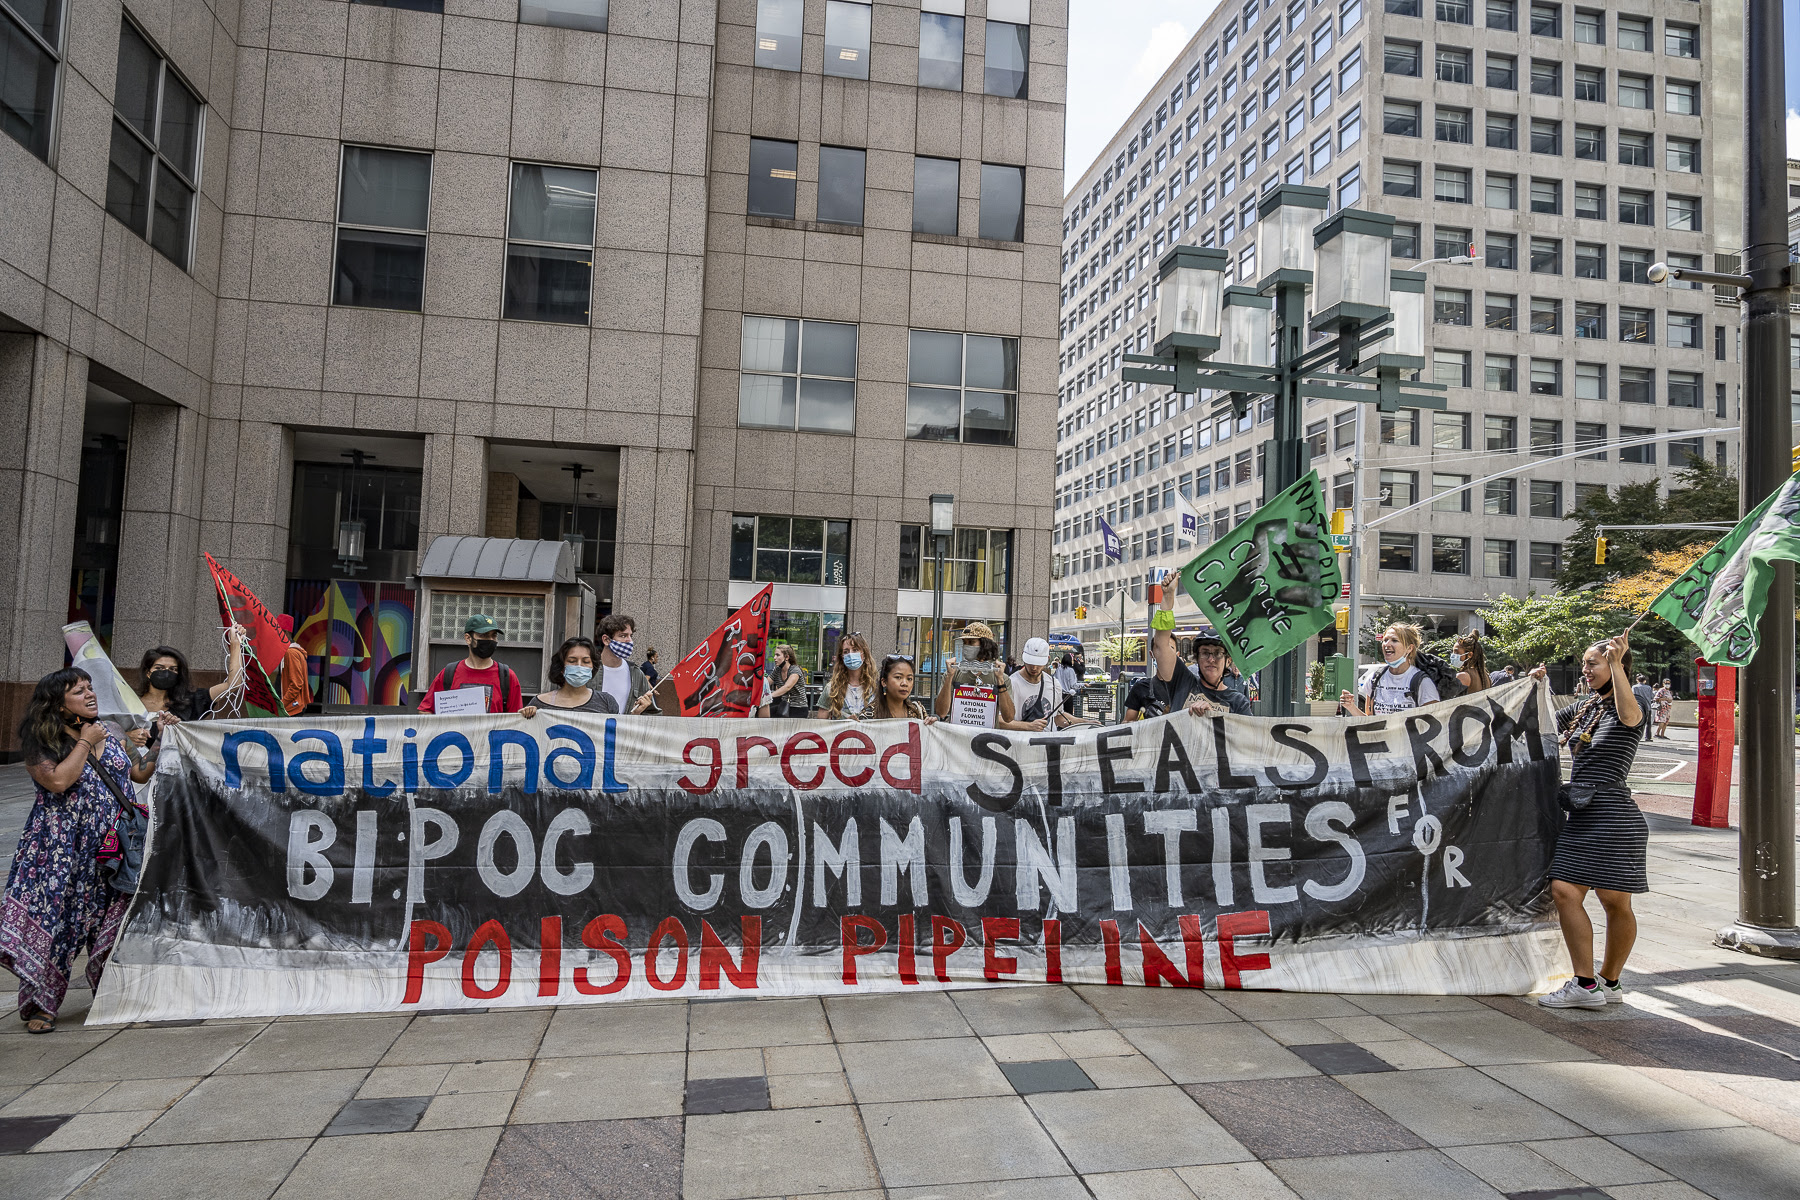 Photo: @kenschles. Protestors hold banner reading "National Greed steals from BIPOC communities for poison pipeline"